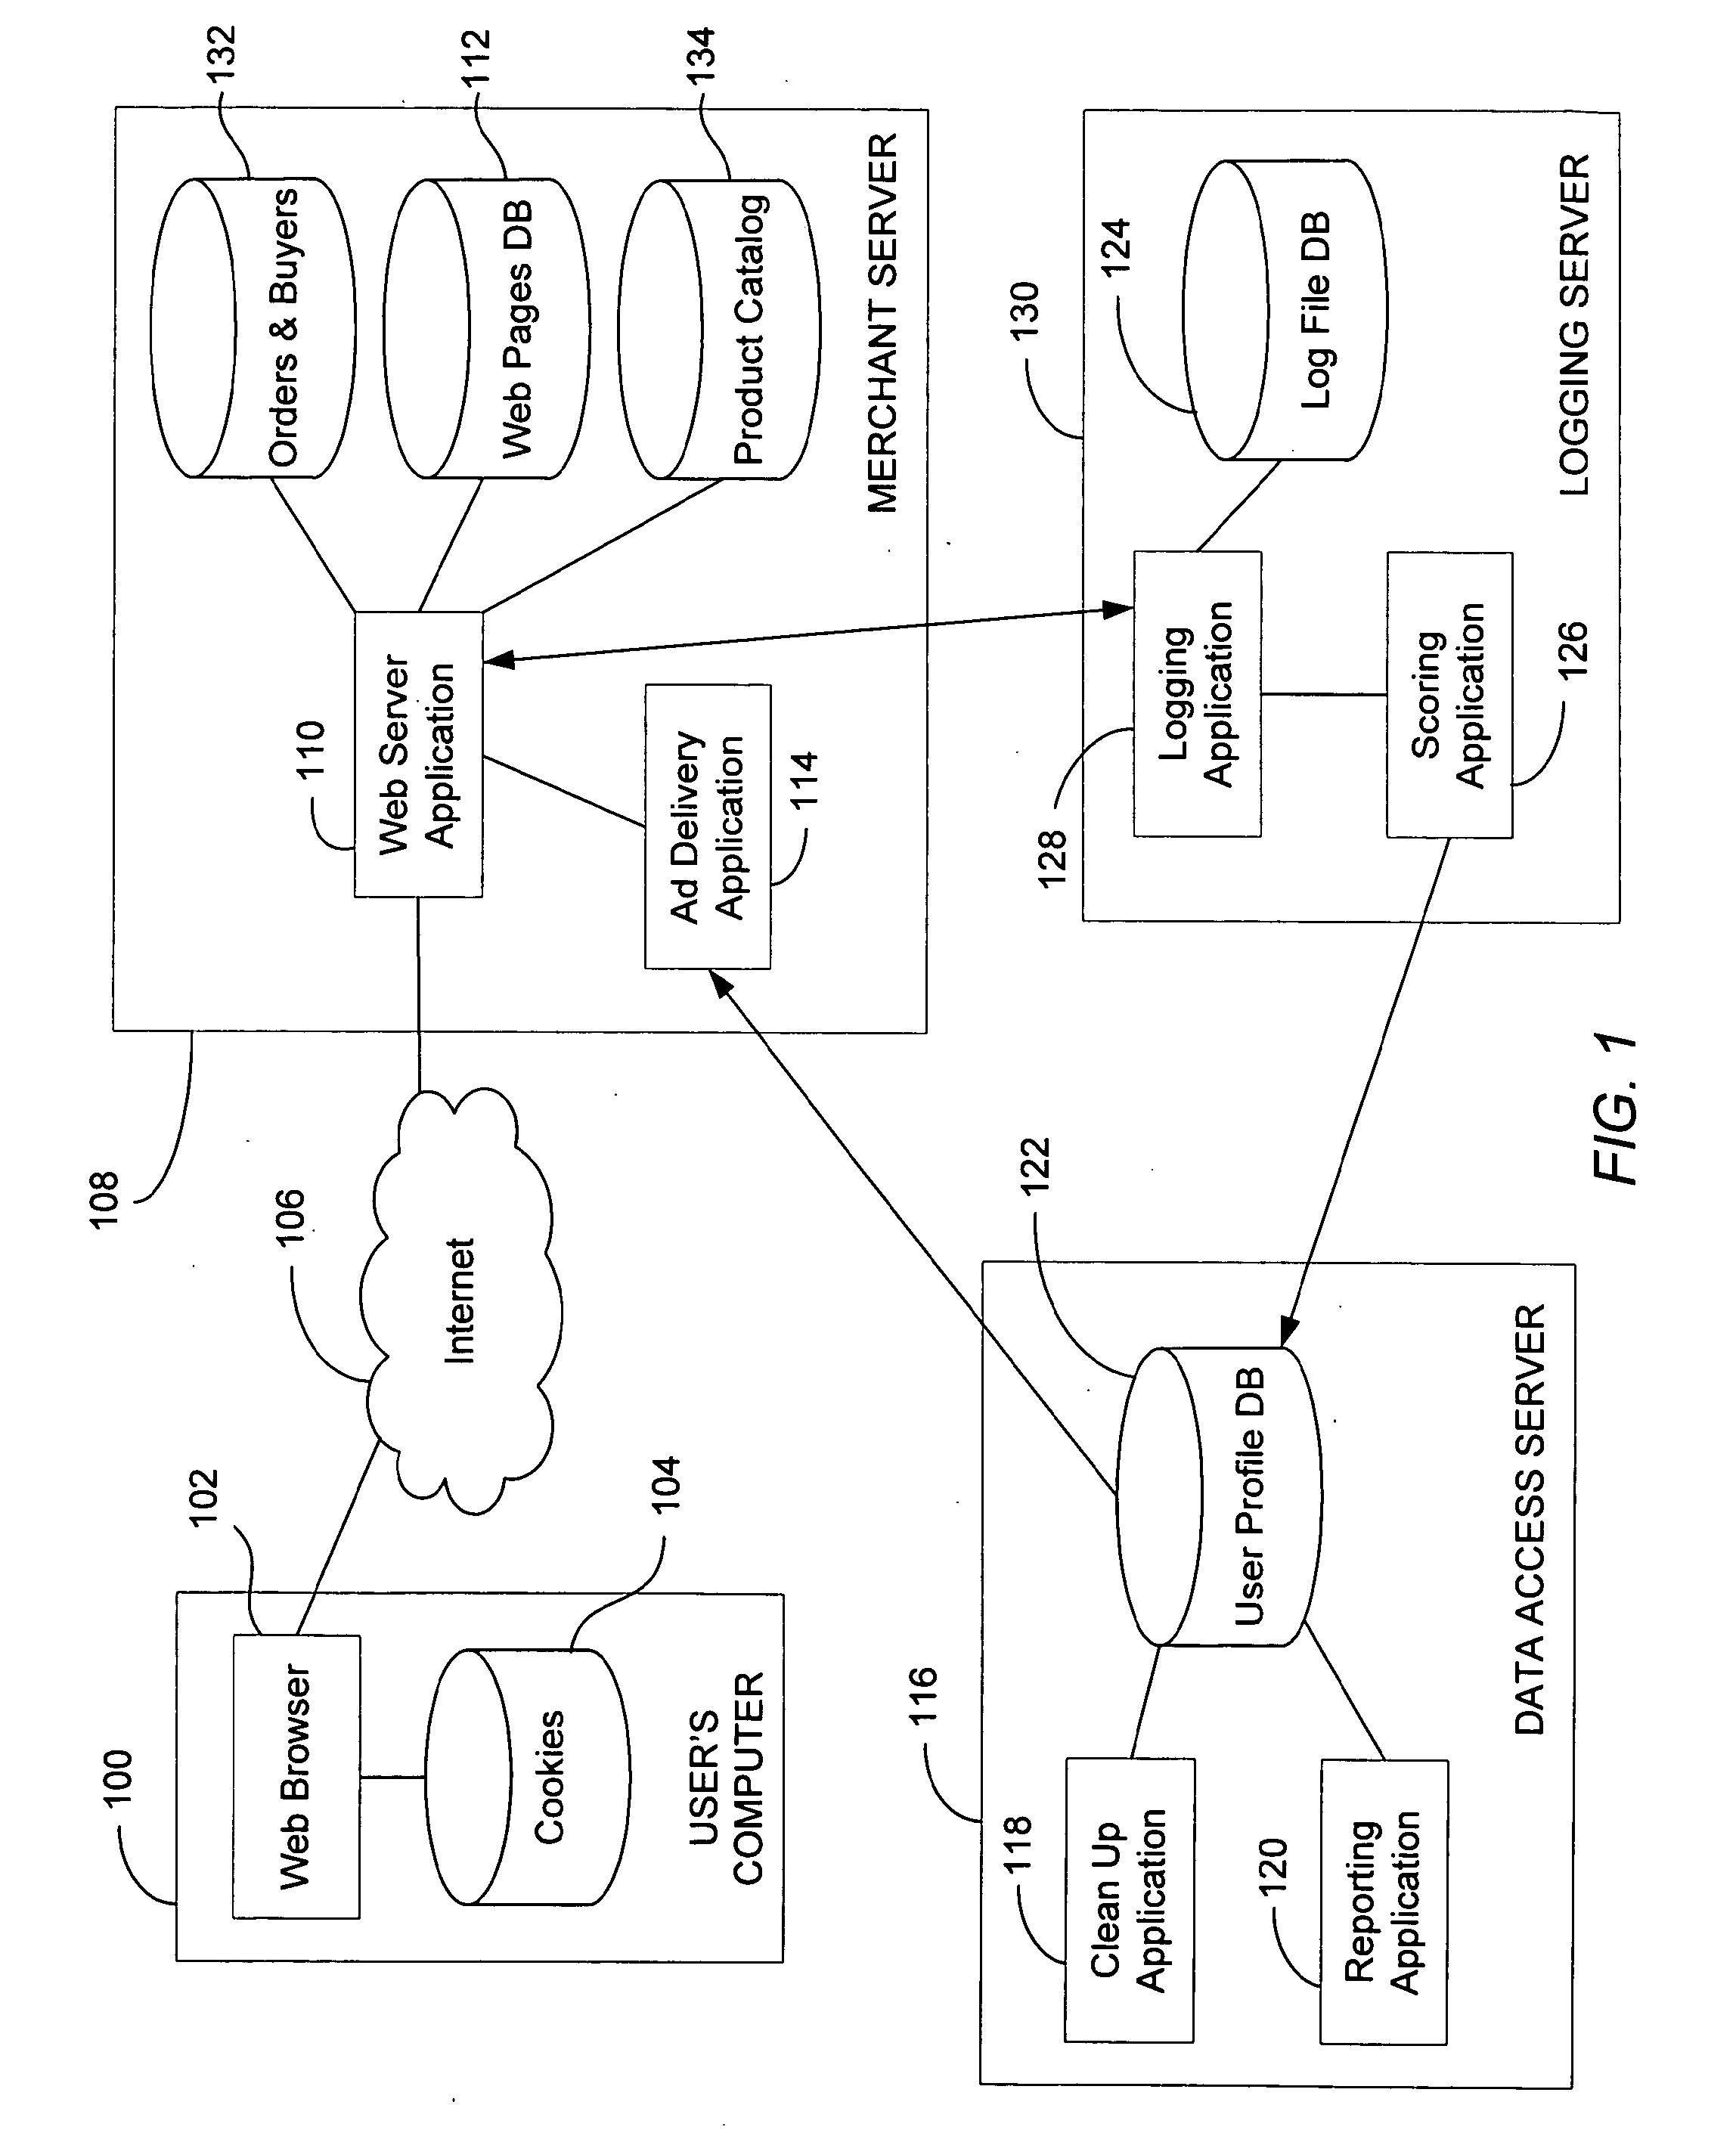 System and Method for Targeted Ad Delivery